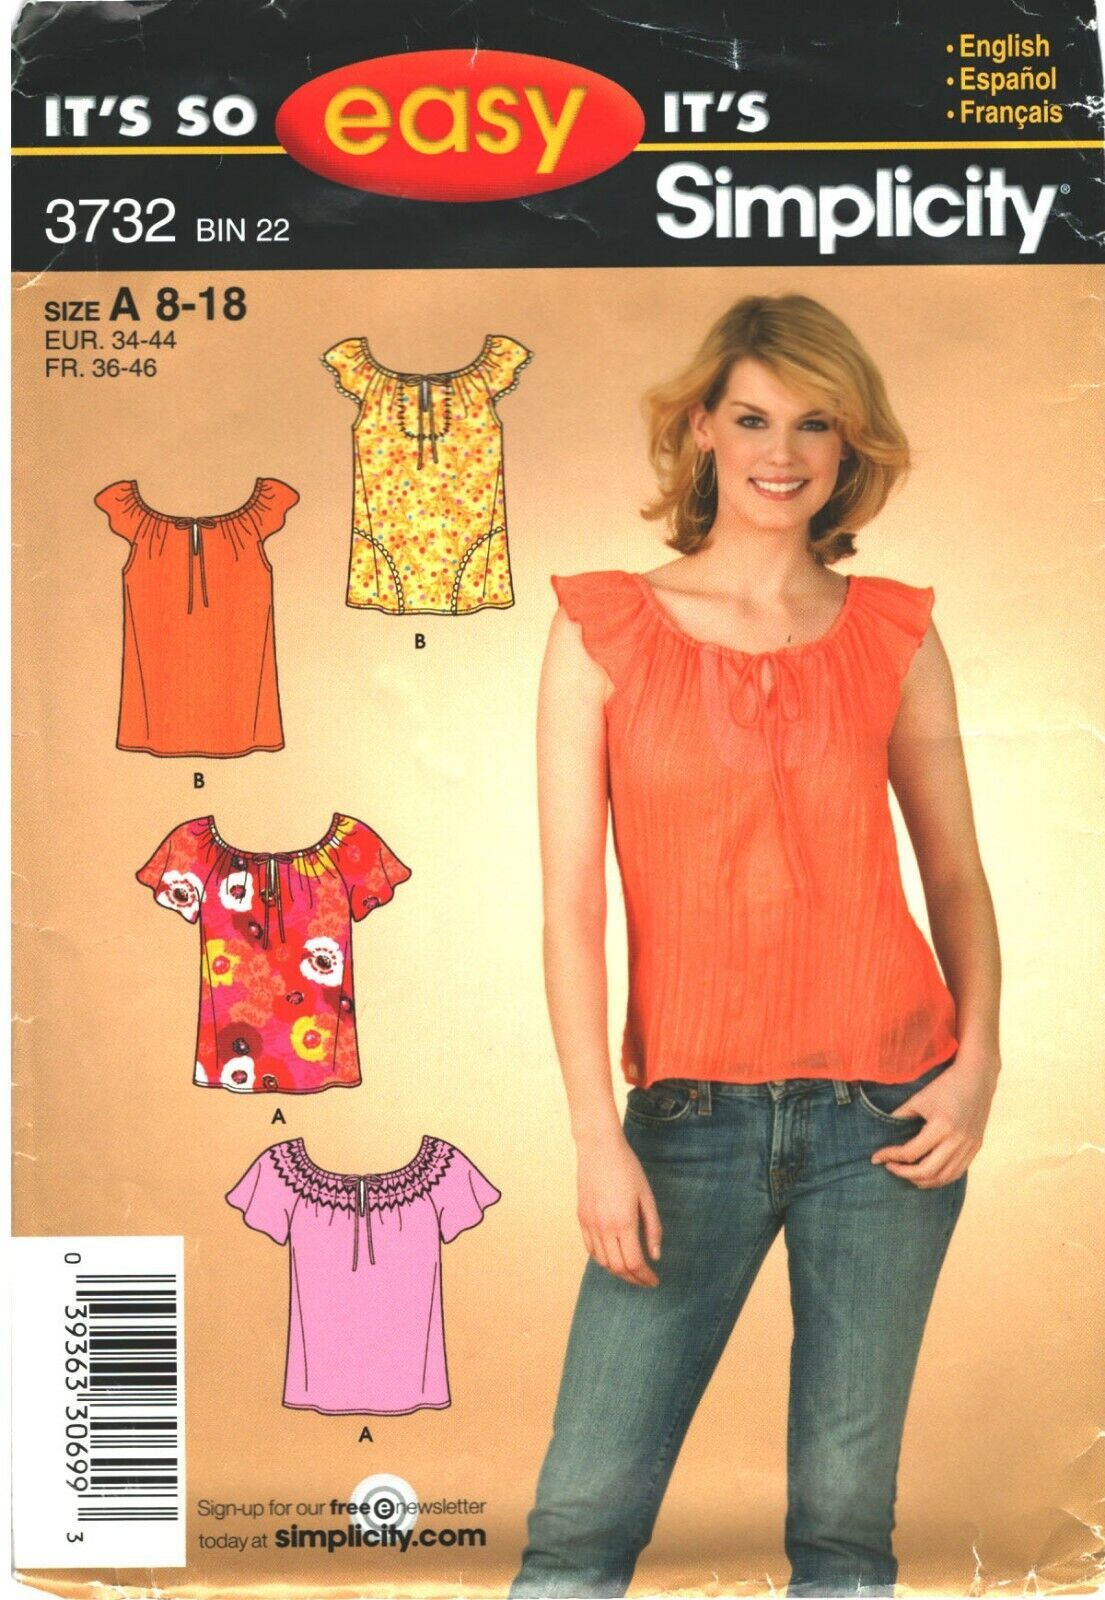 Primary image for Misses' TOPS 2007 Simplicity Pattern 3732 Sizes 8-18